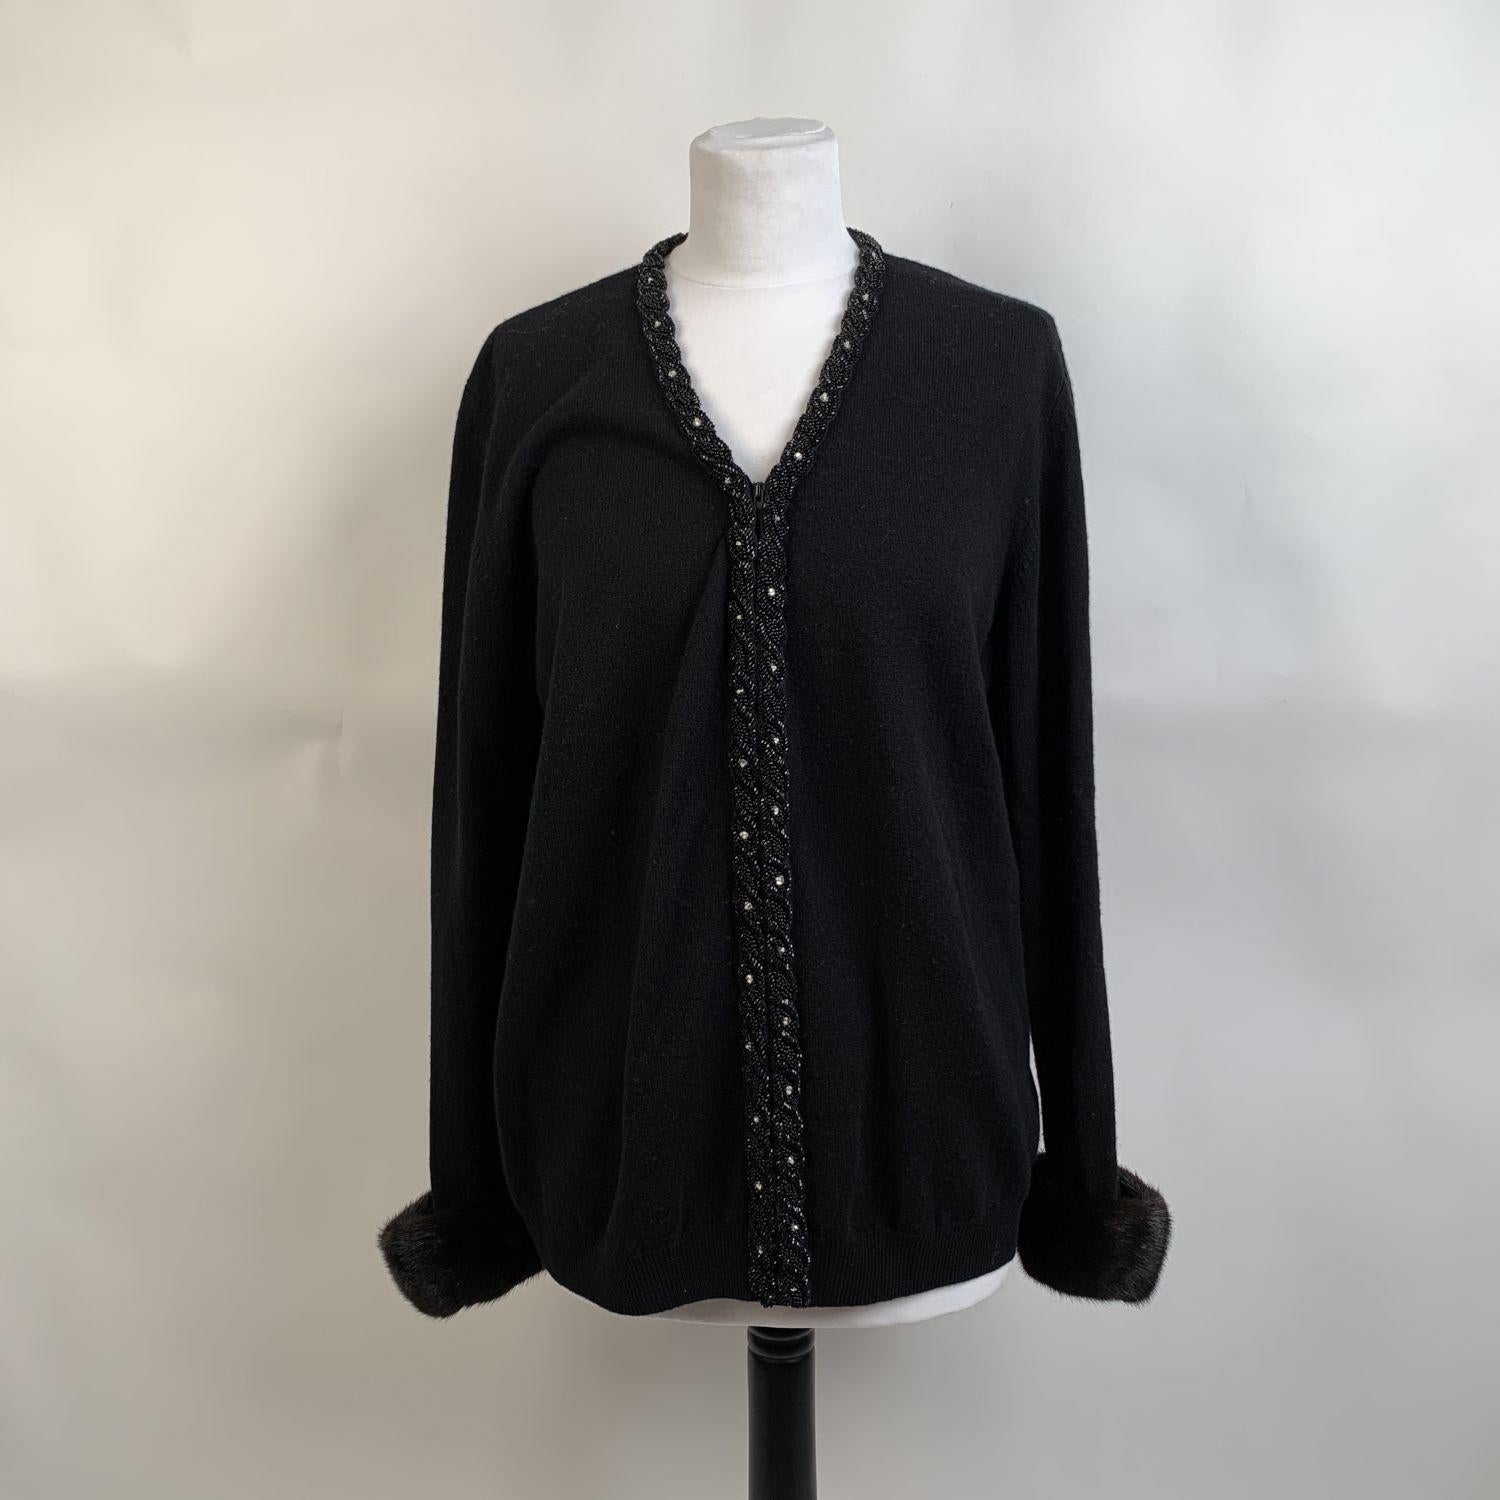 Black embellished cardigan signed Anna Molinari for Blumarine. The cardigan features beads embellishment on the front and on the neckline, zip closure and fur trim on the cuffs. Composition tag is missing. It seems to be wool. Size: 46 IT, 40 D (The